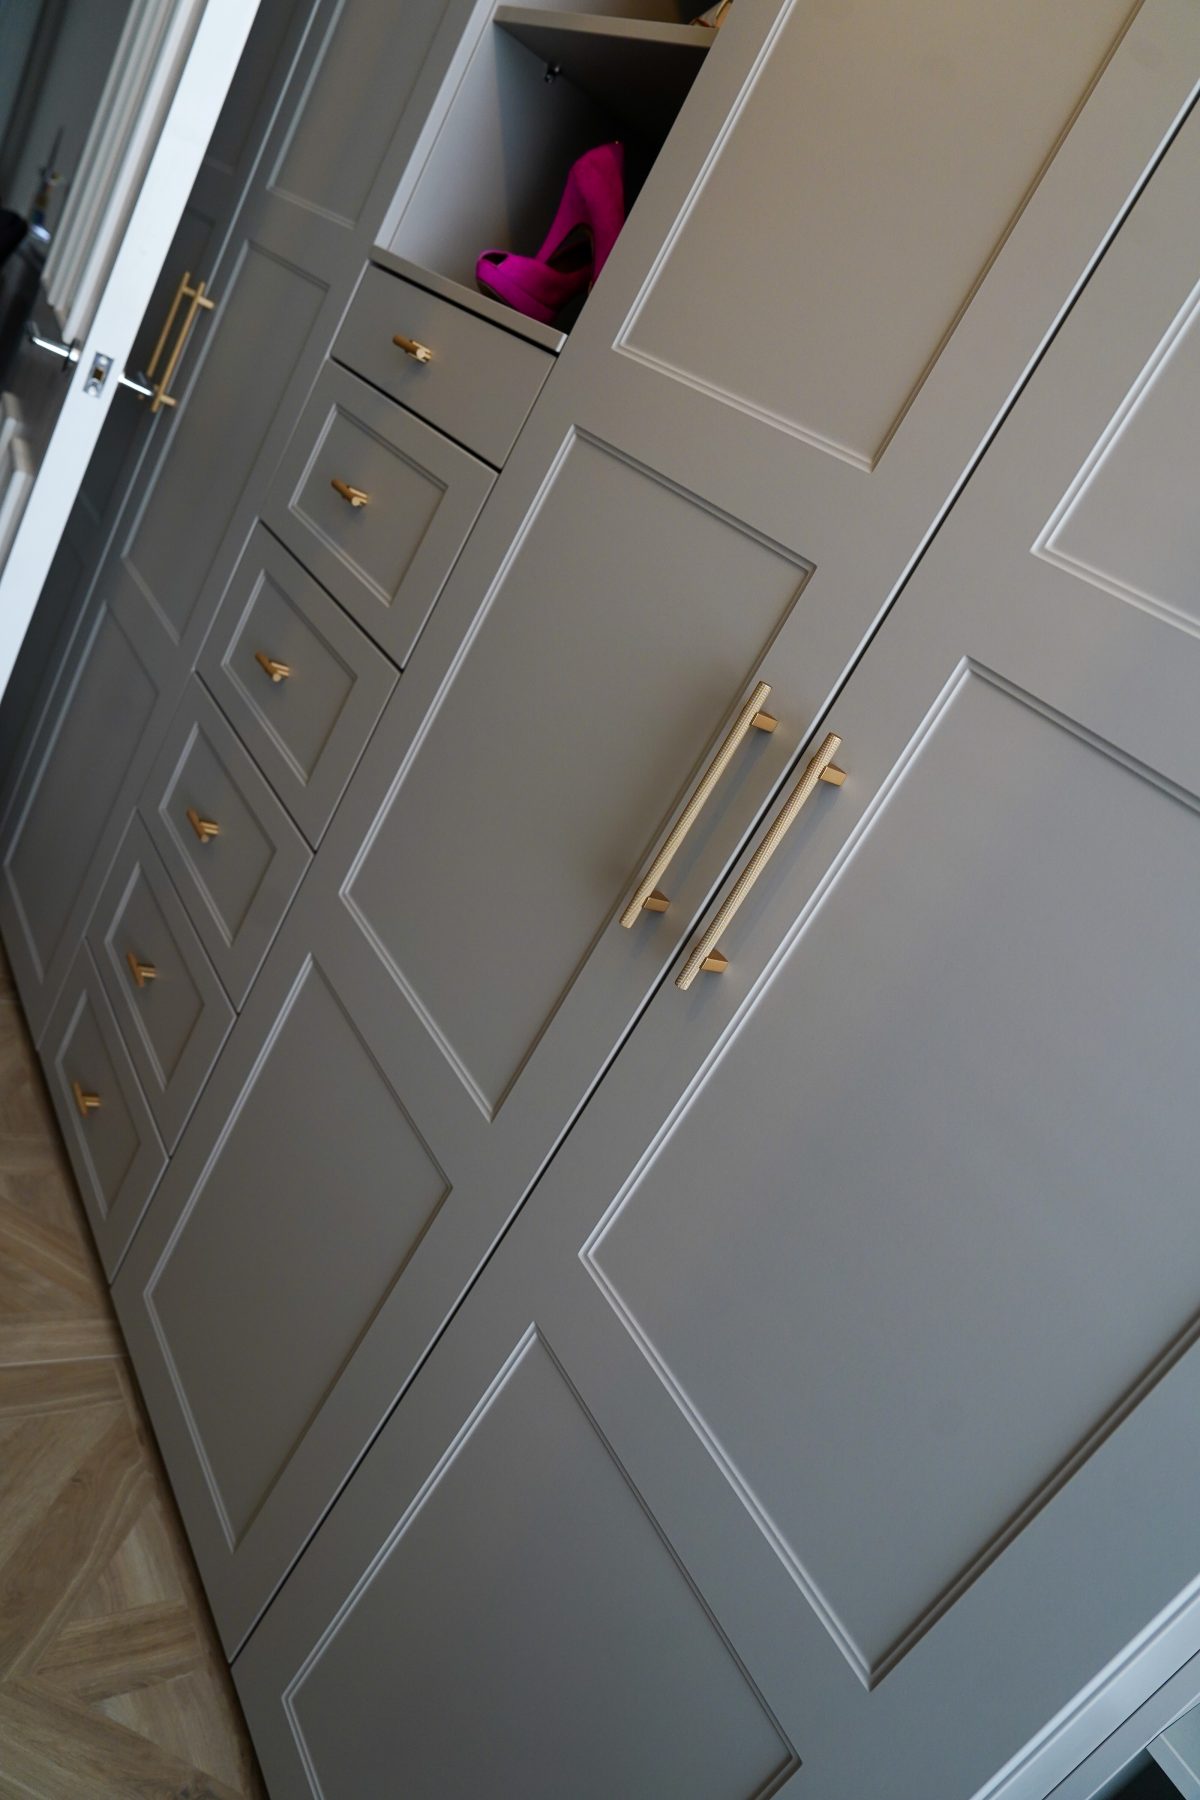 Walk-in-wardrobe Project by Fusion Robes Belfast